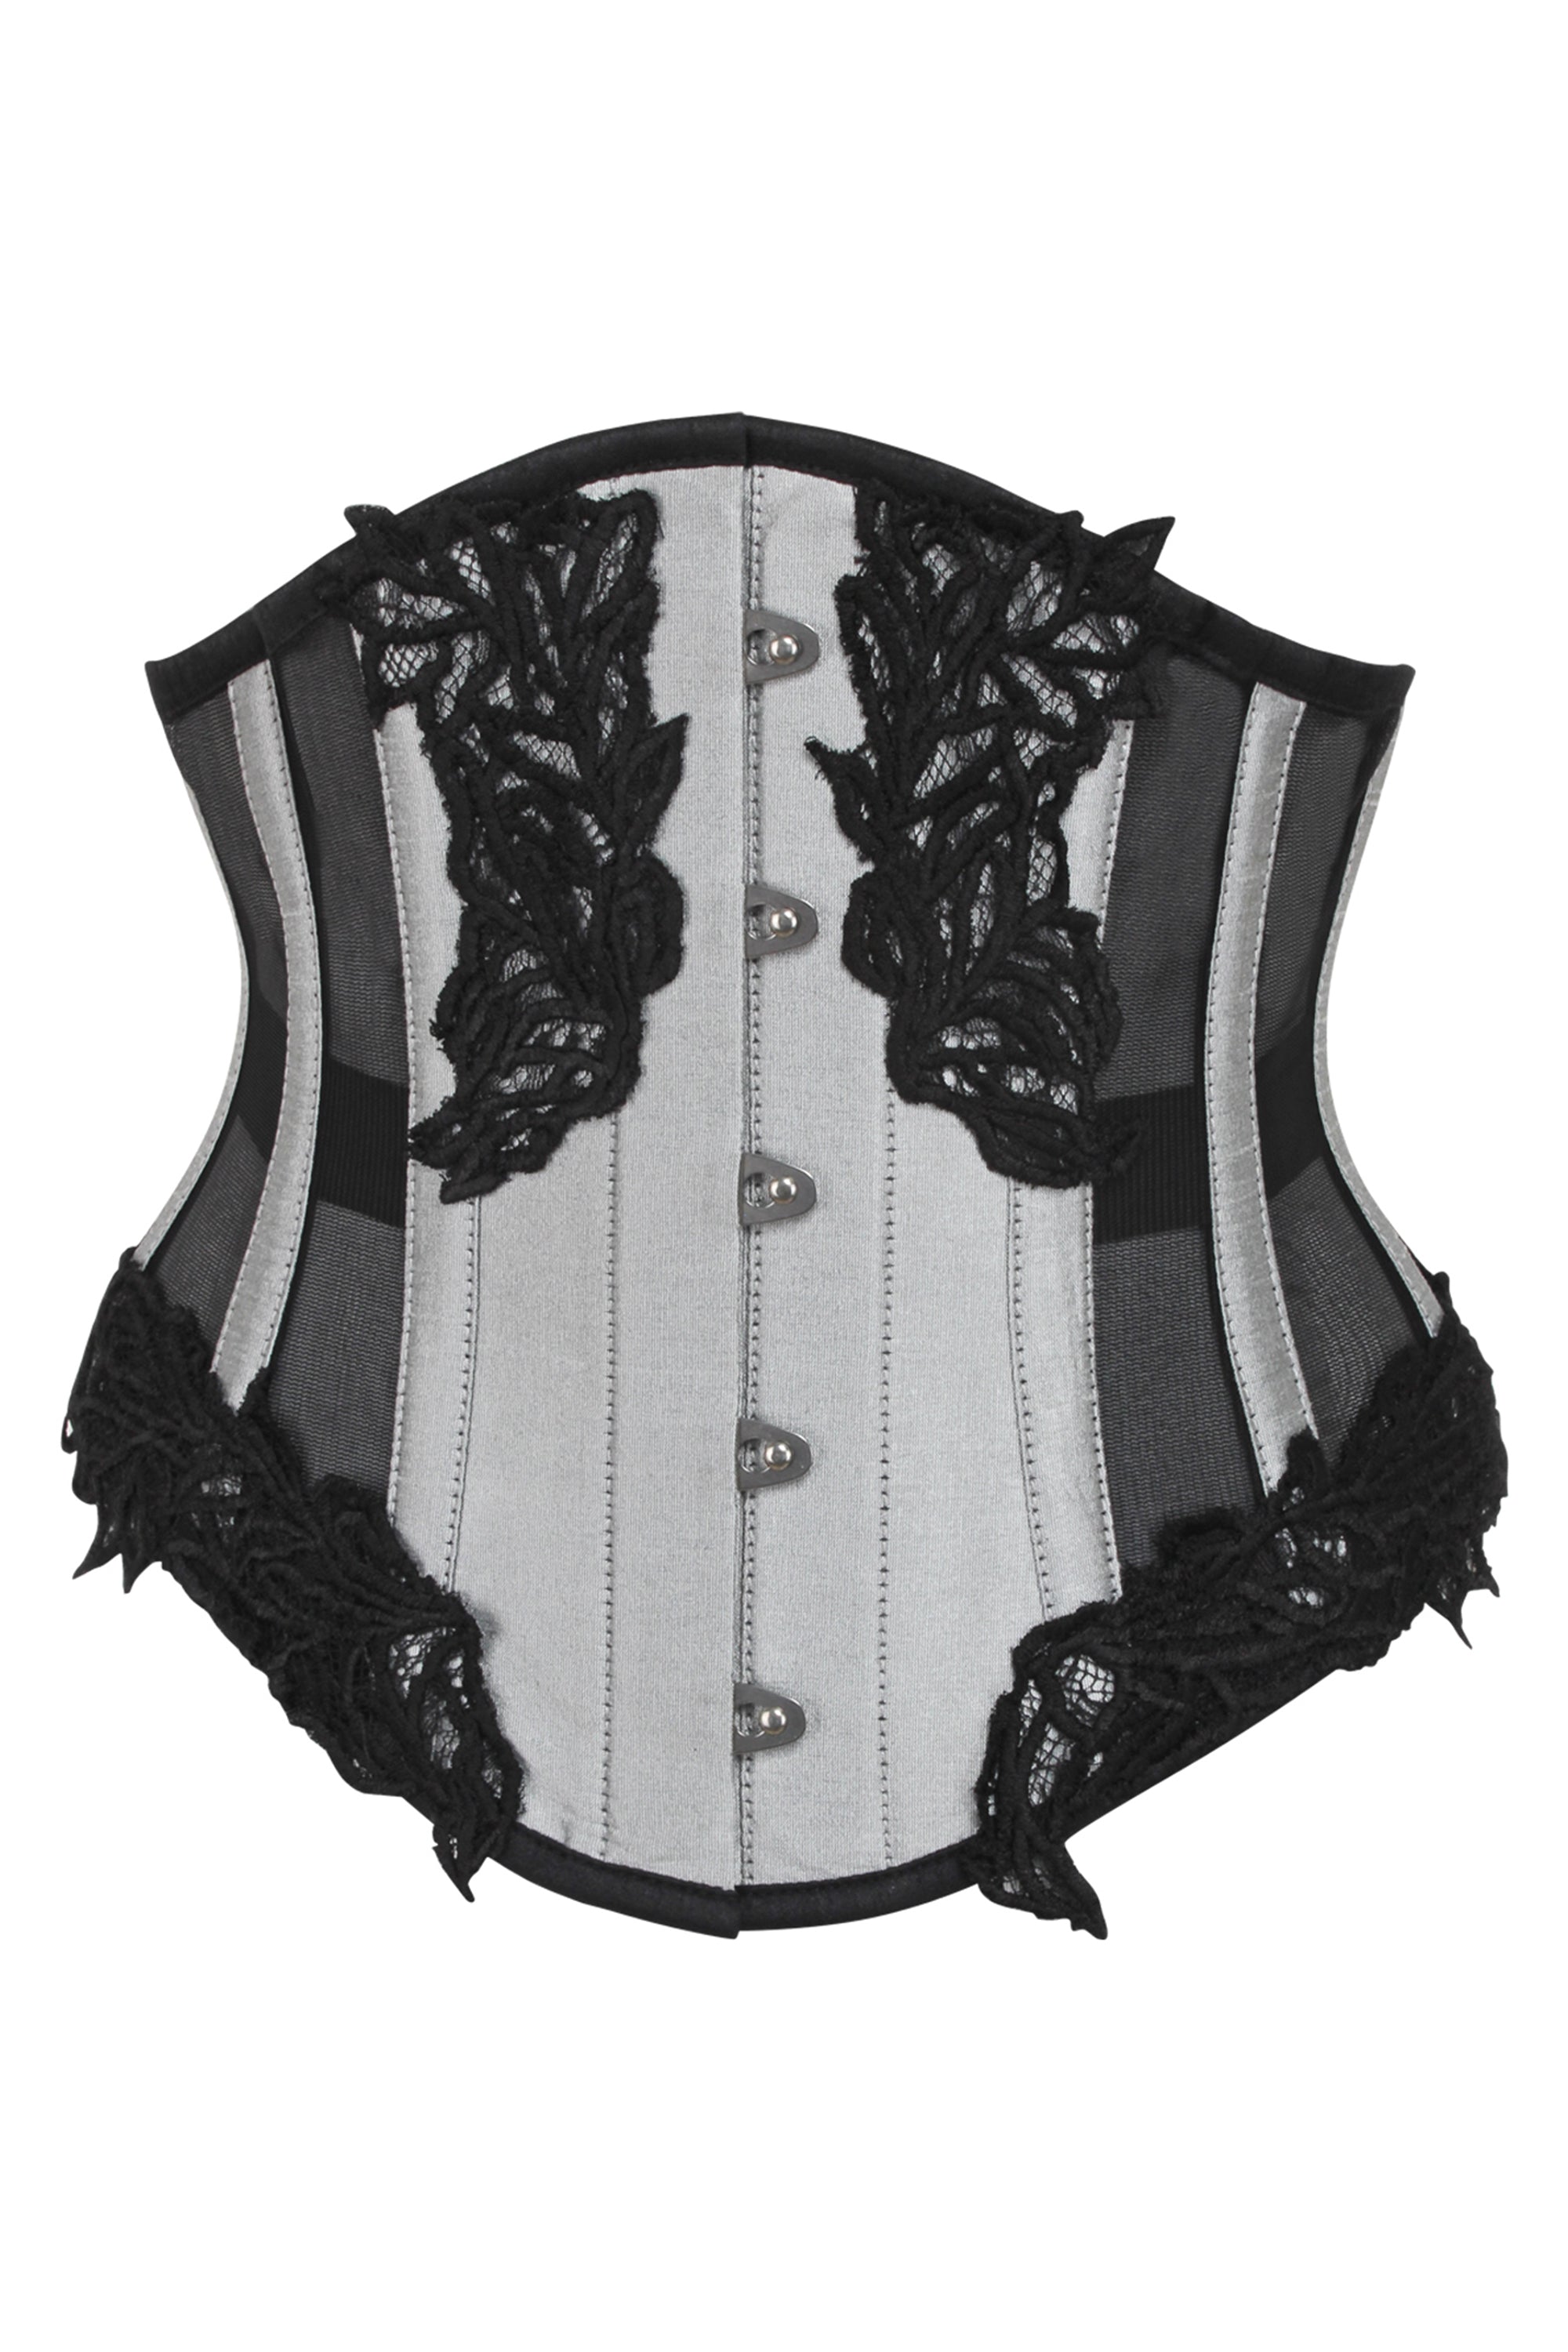 Underbust Custom Made Black Mesh with Lace Waspie Corset